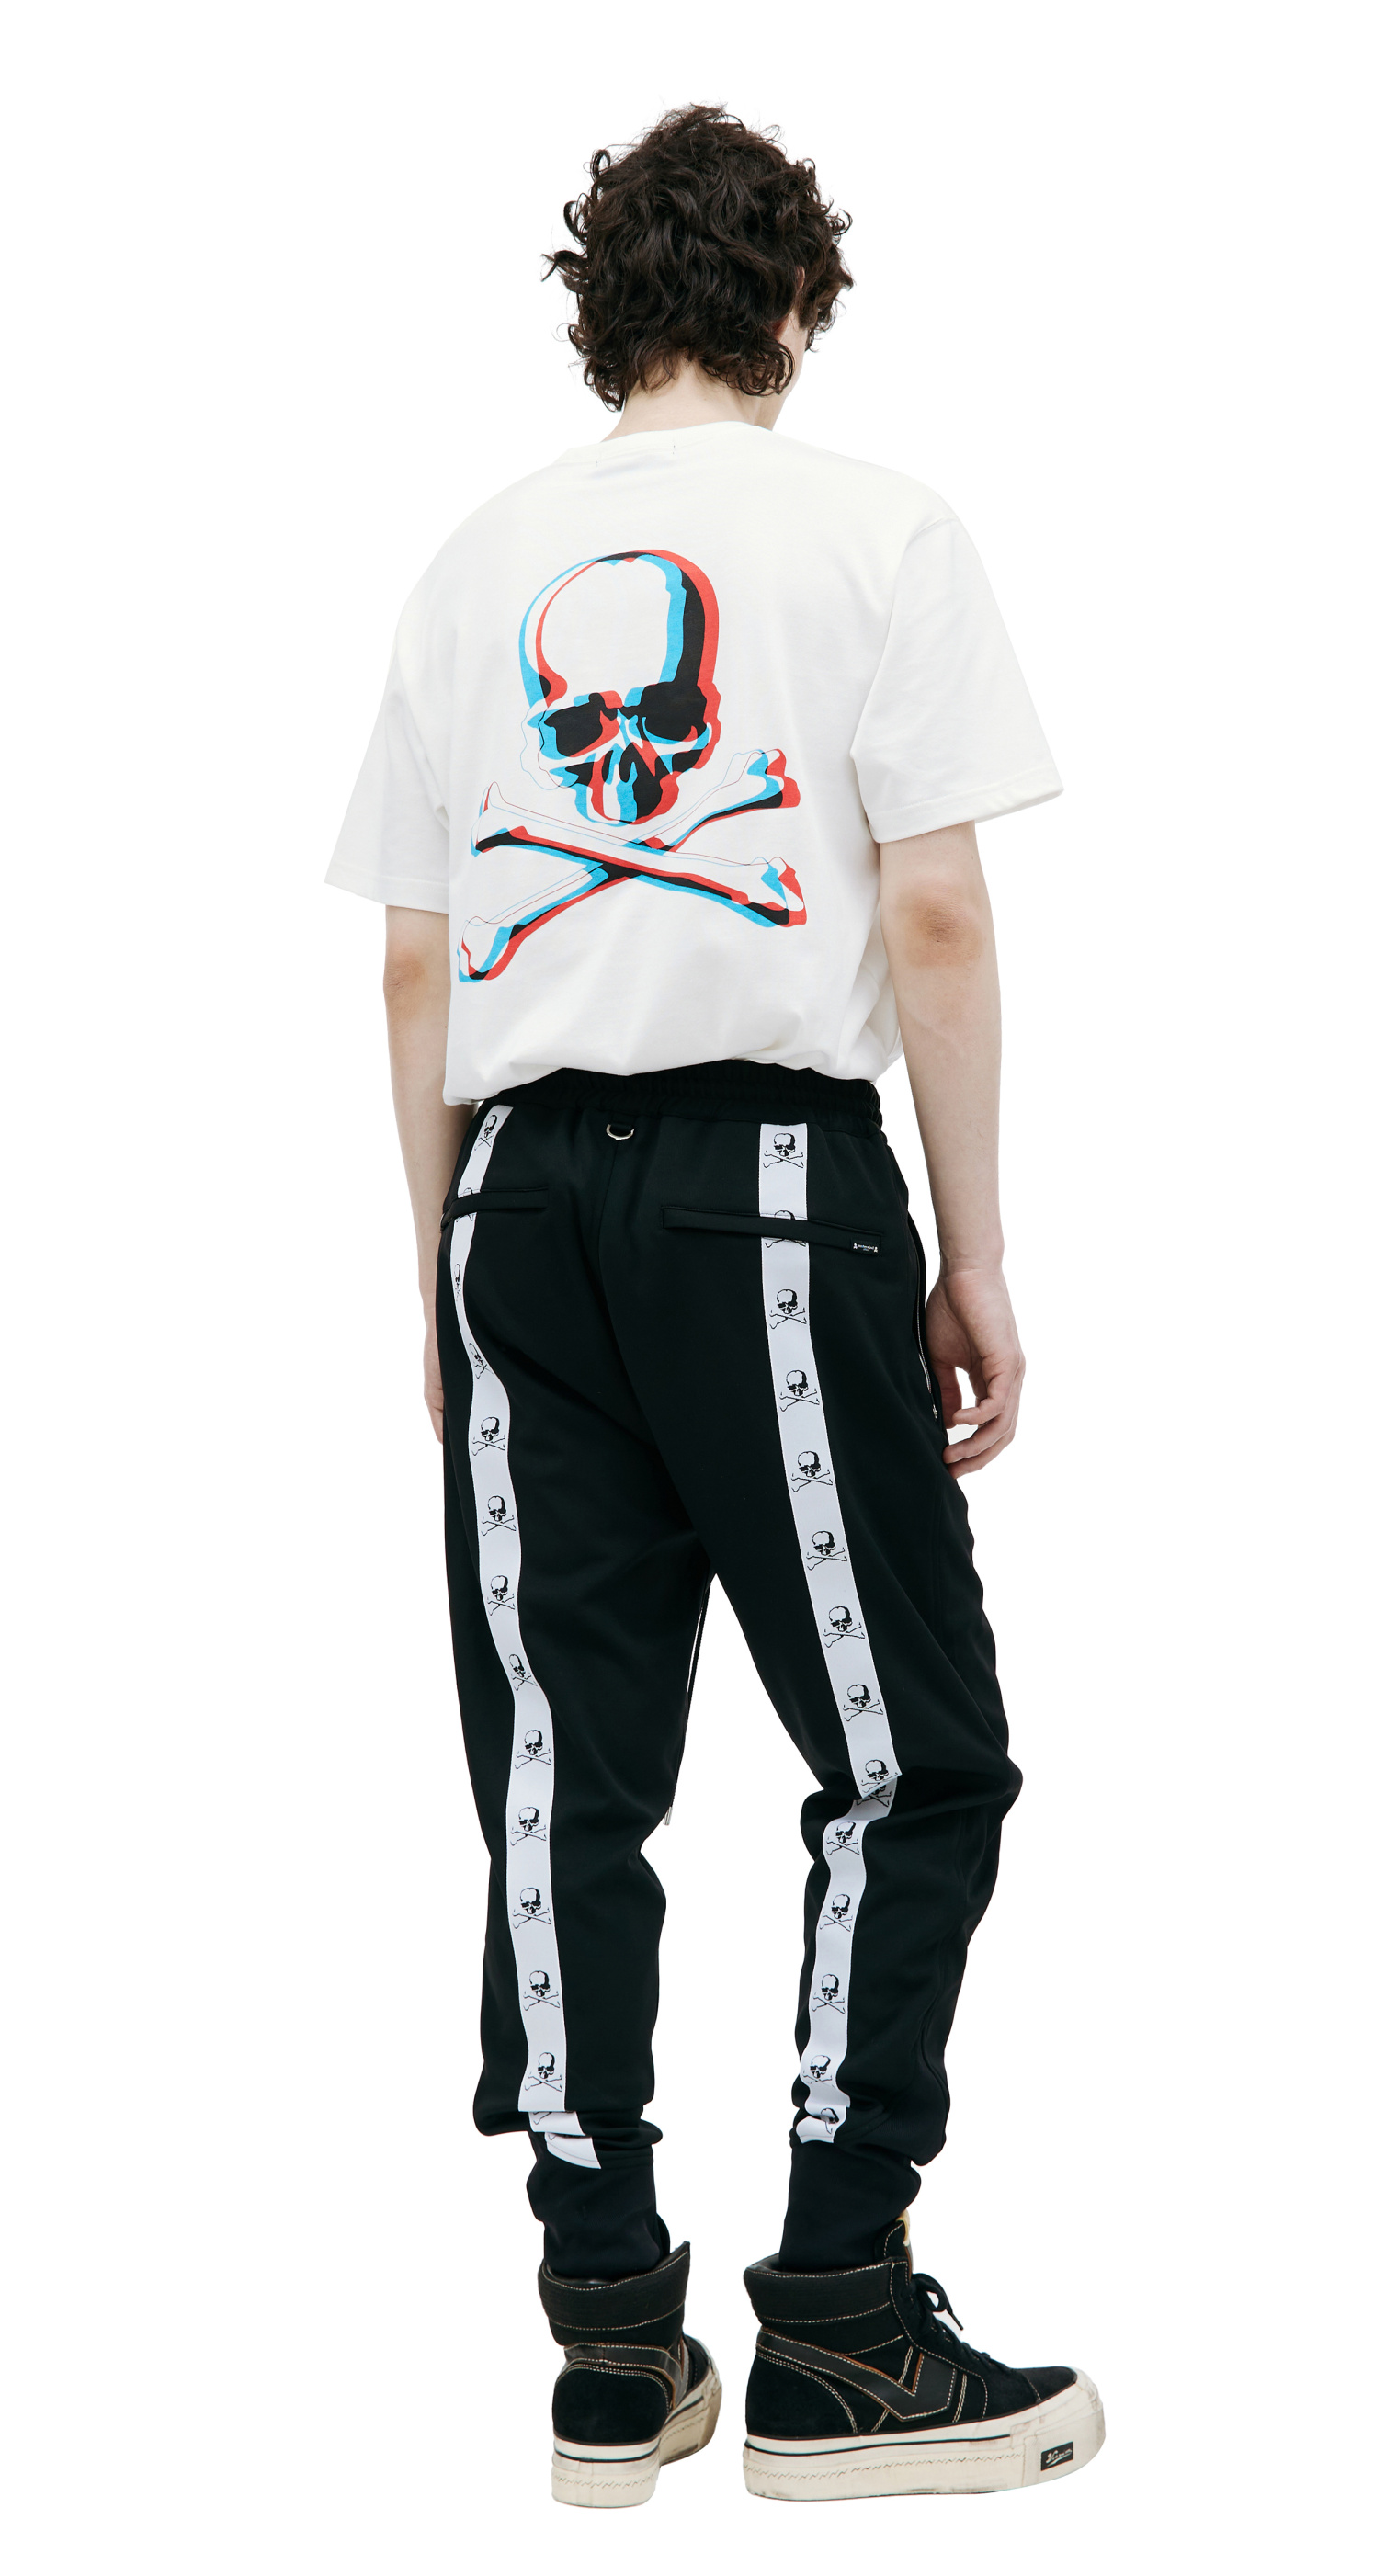 Mastermind WORLD Black trousers with stripes